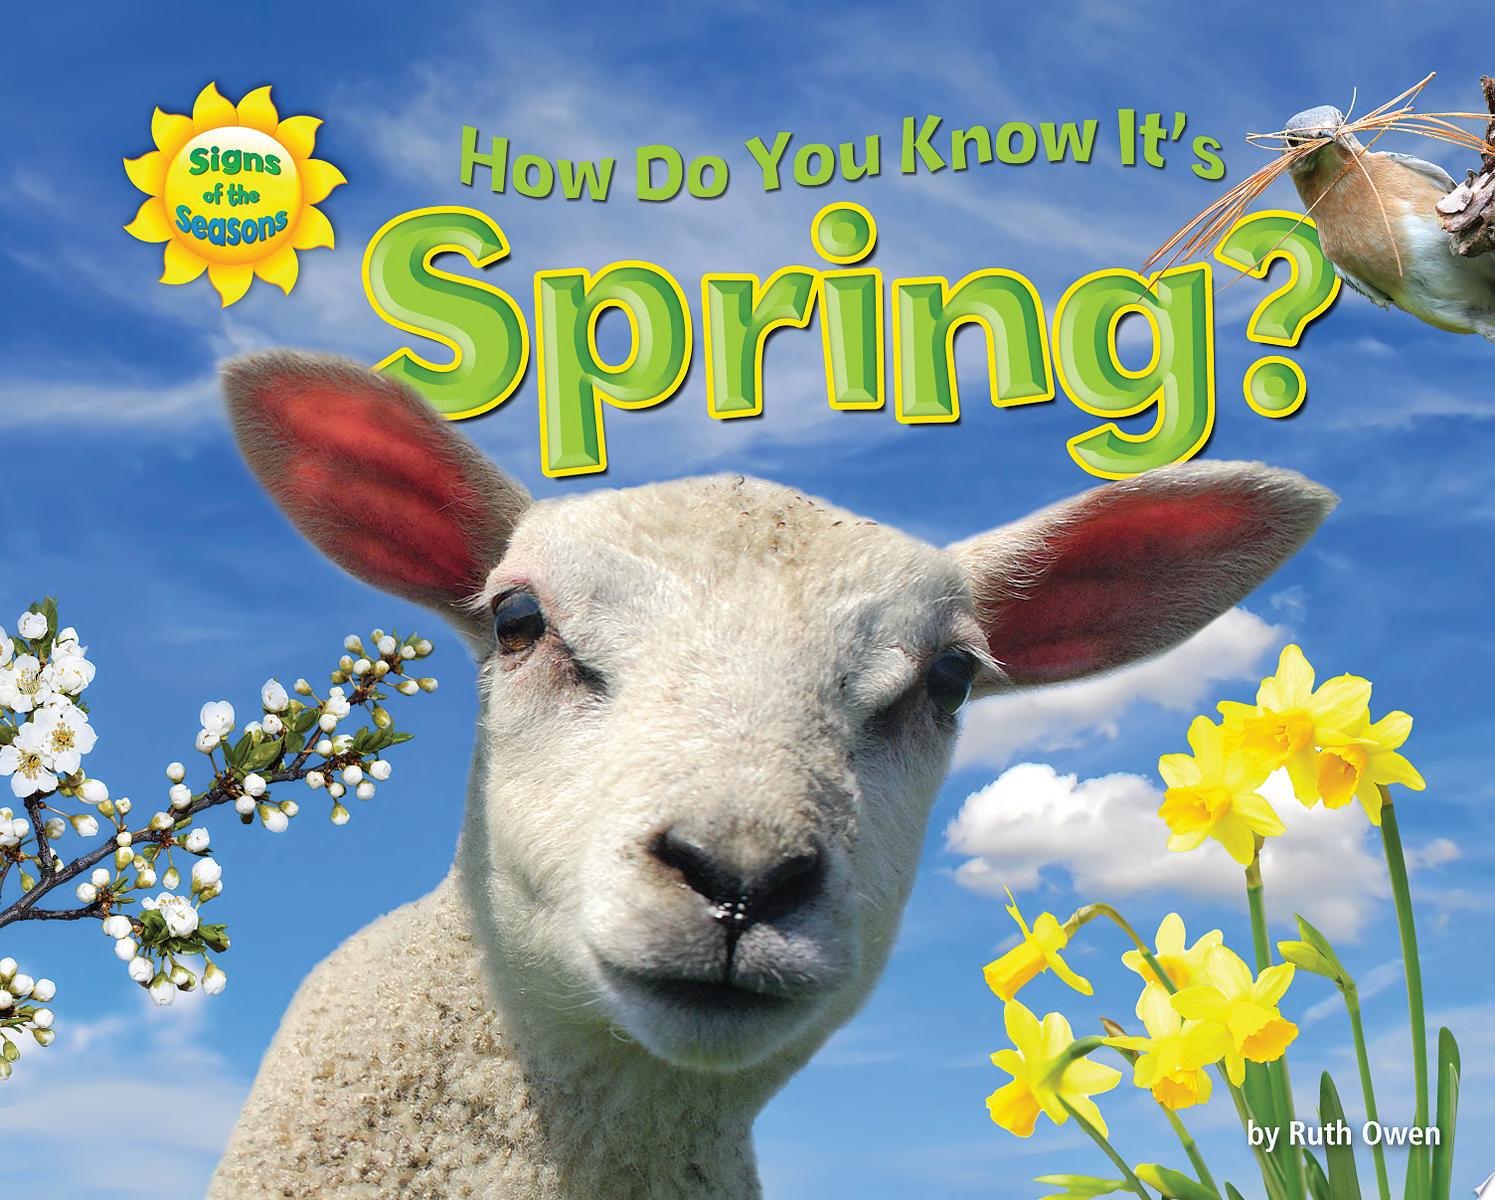 Image for "How Do You Know It's Spring?"